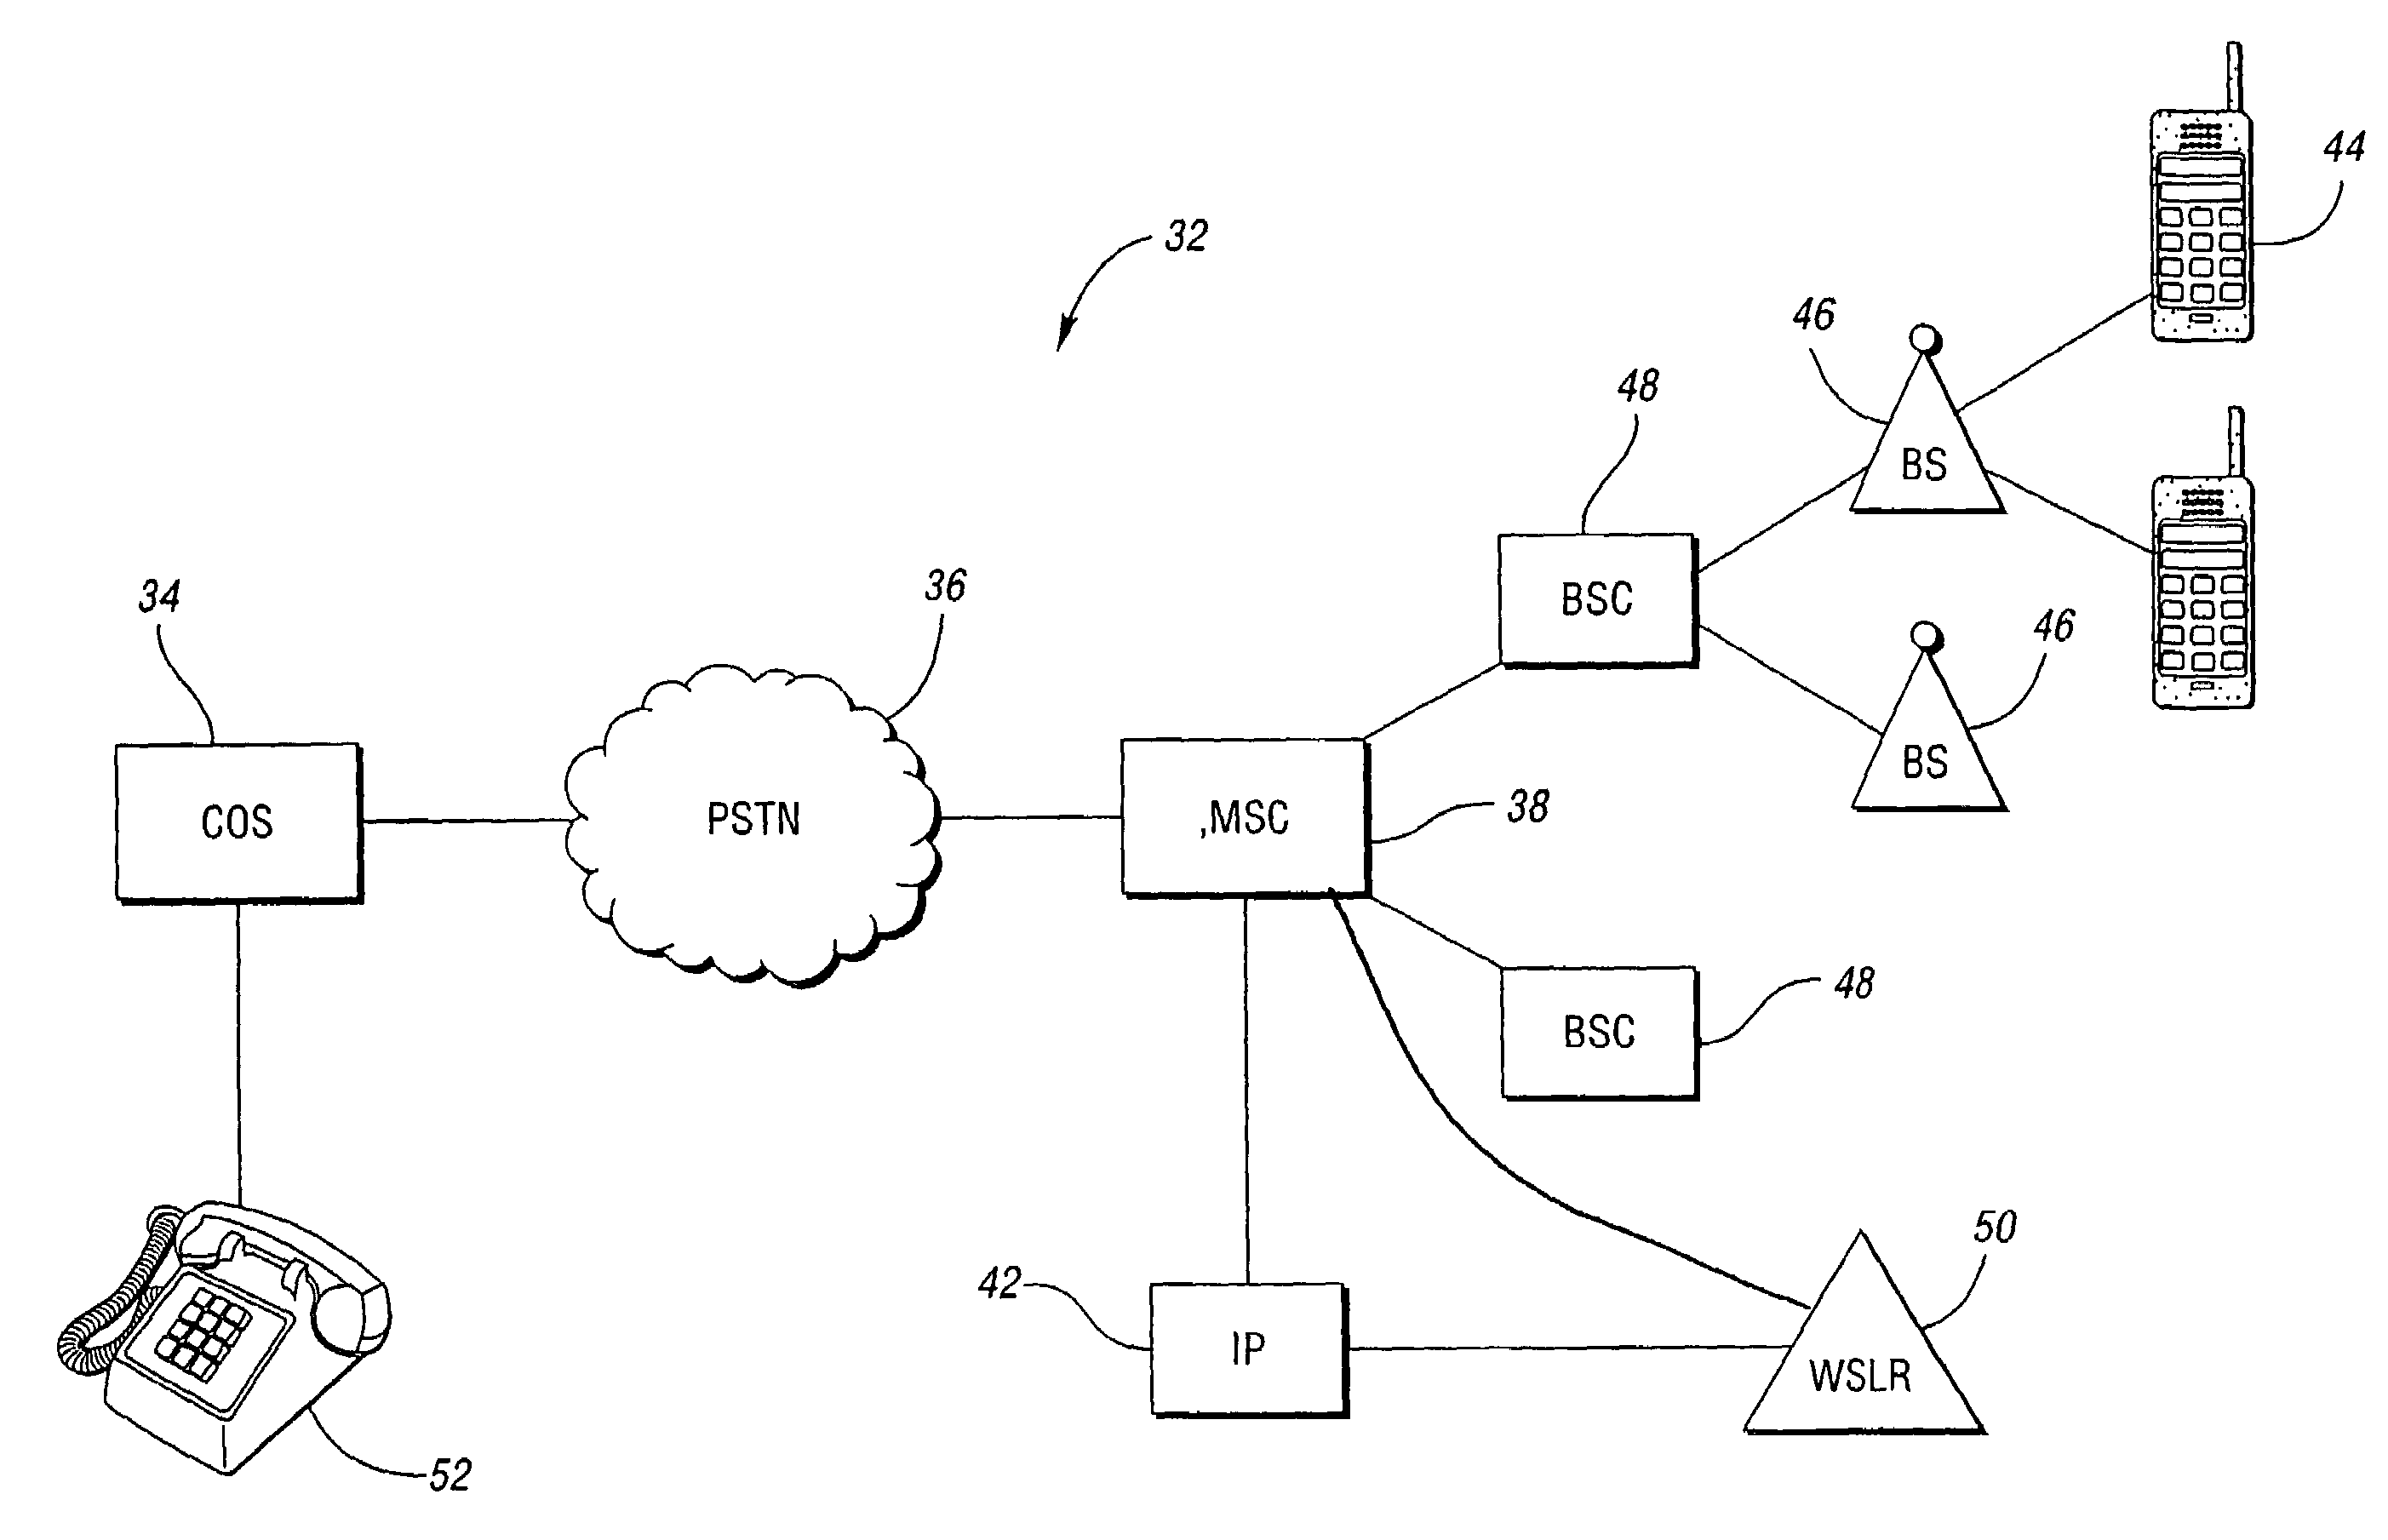 Method and system for conditionally routing calls